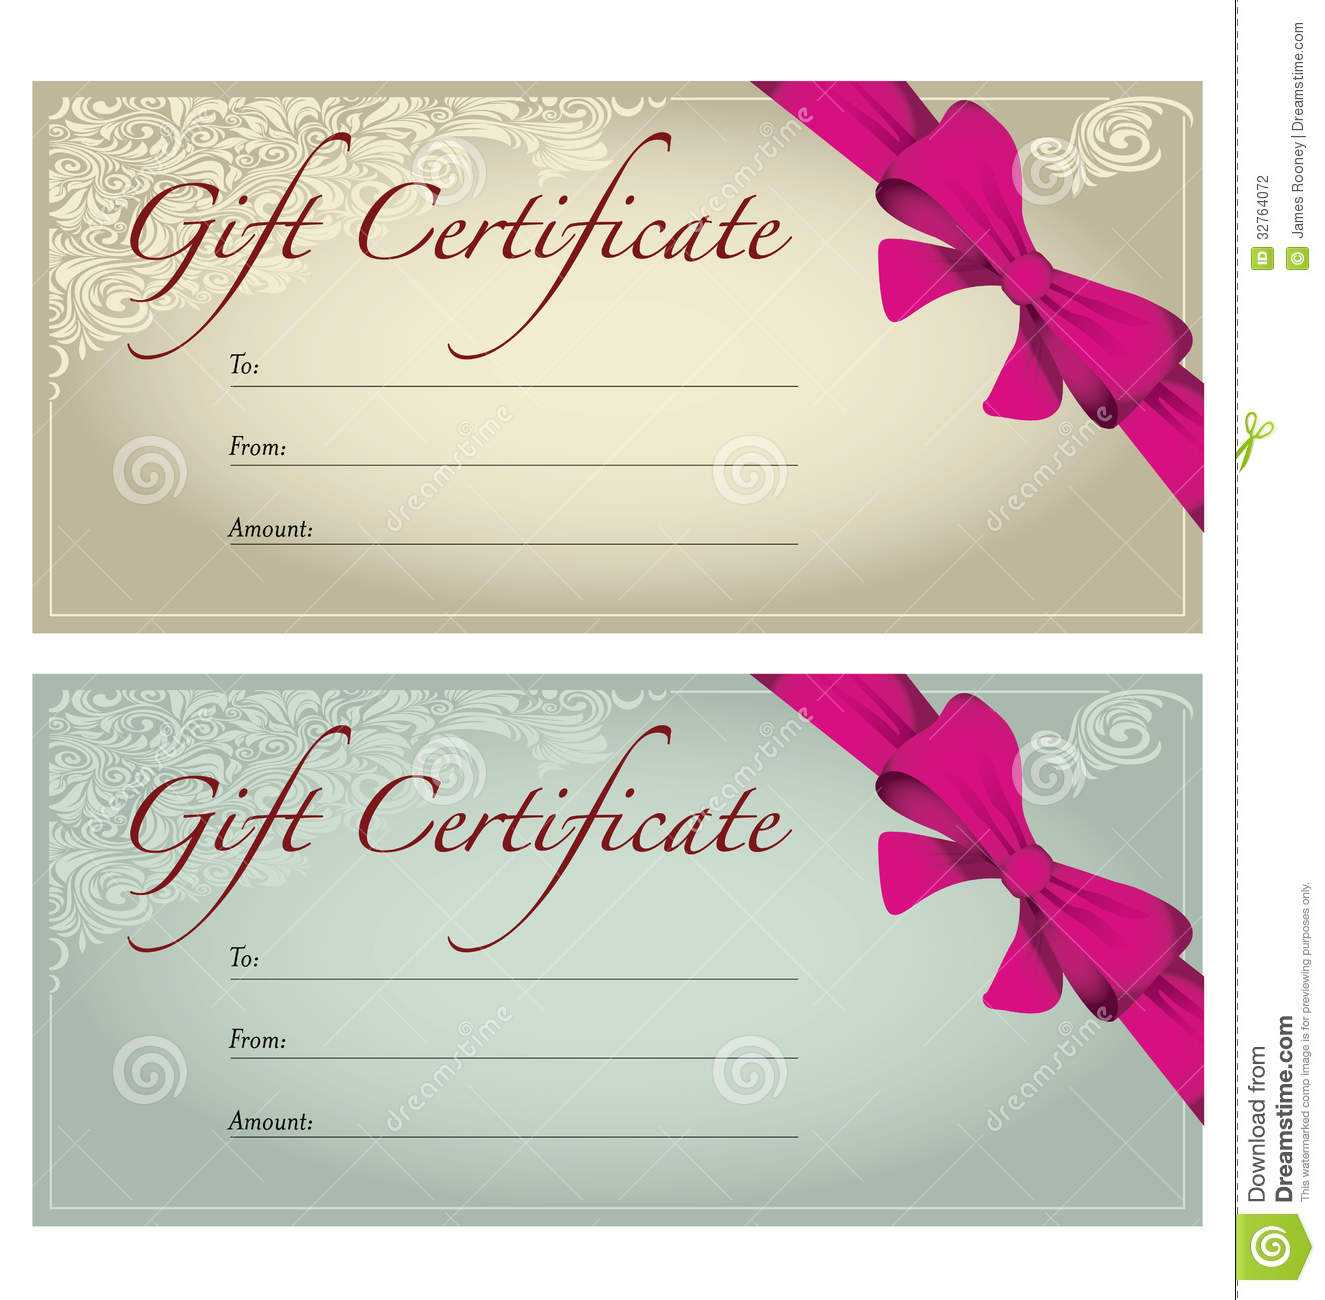 Gift Voucher Stock Illustration. Illustration Of Editable Throughout Free Photography Gift Certificate Template